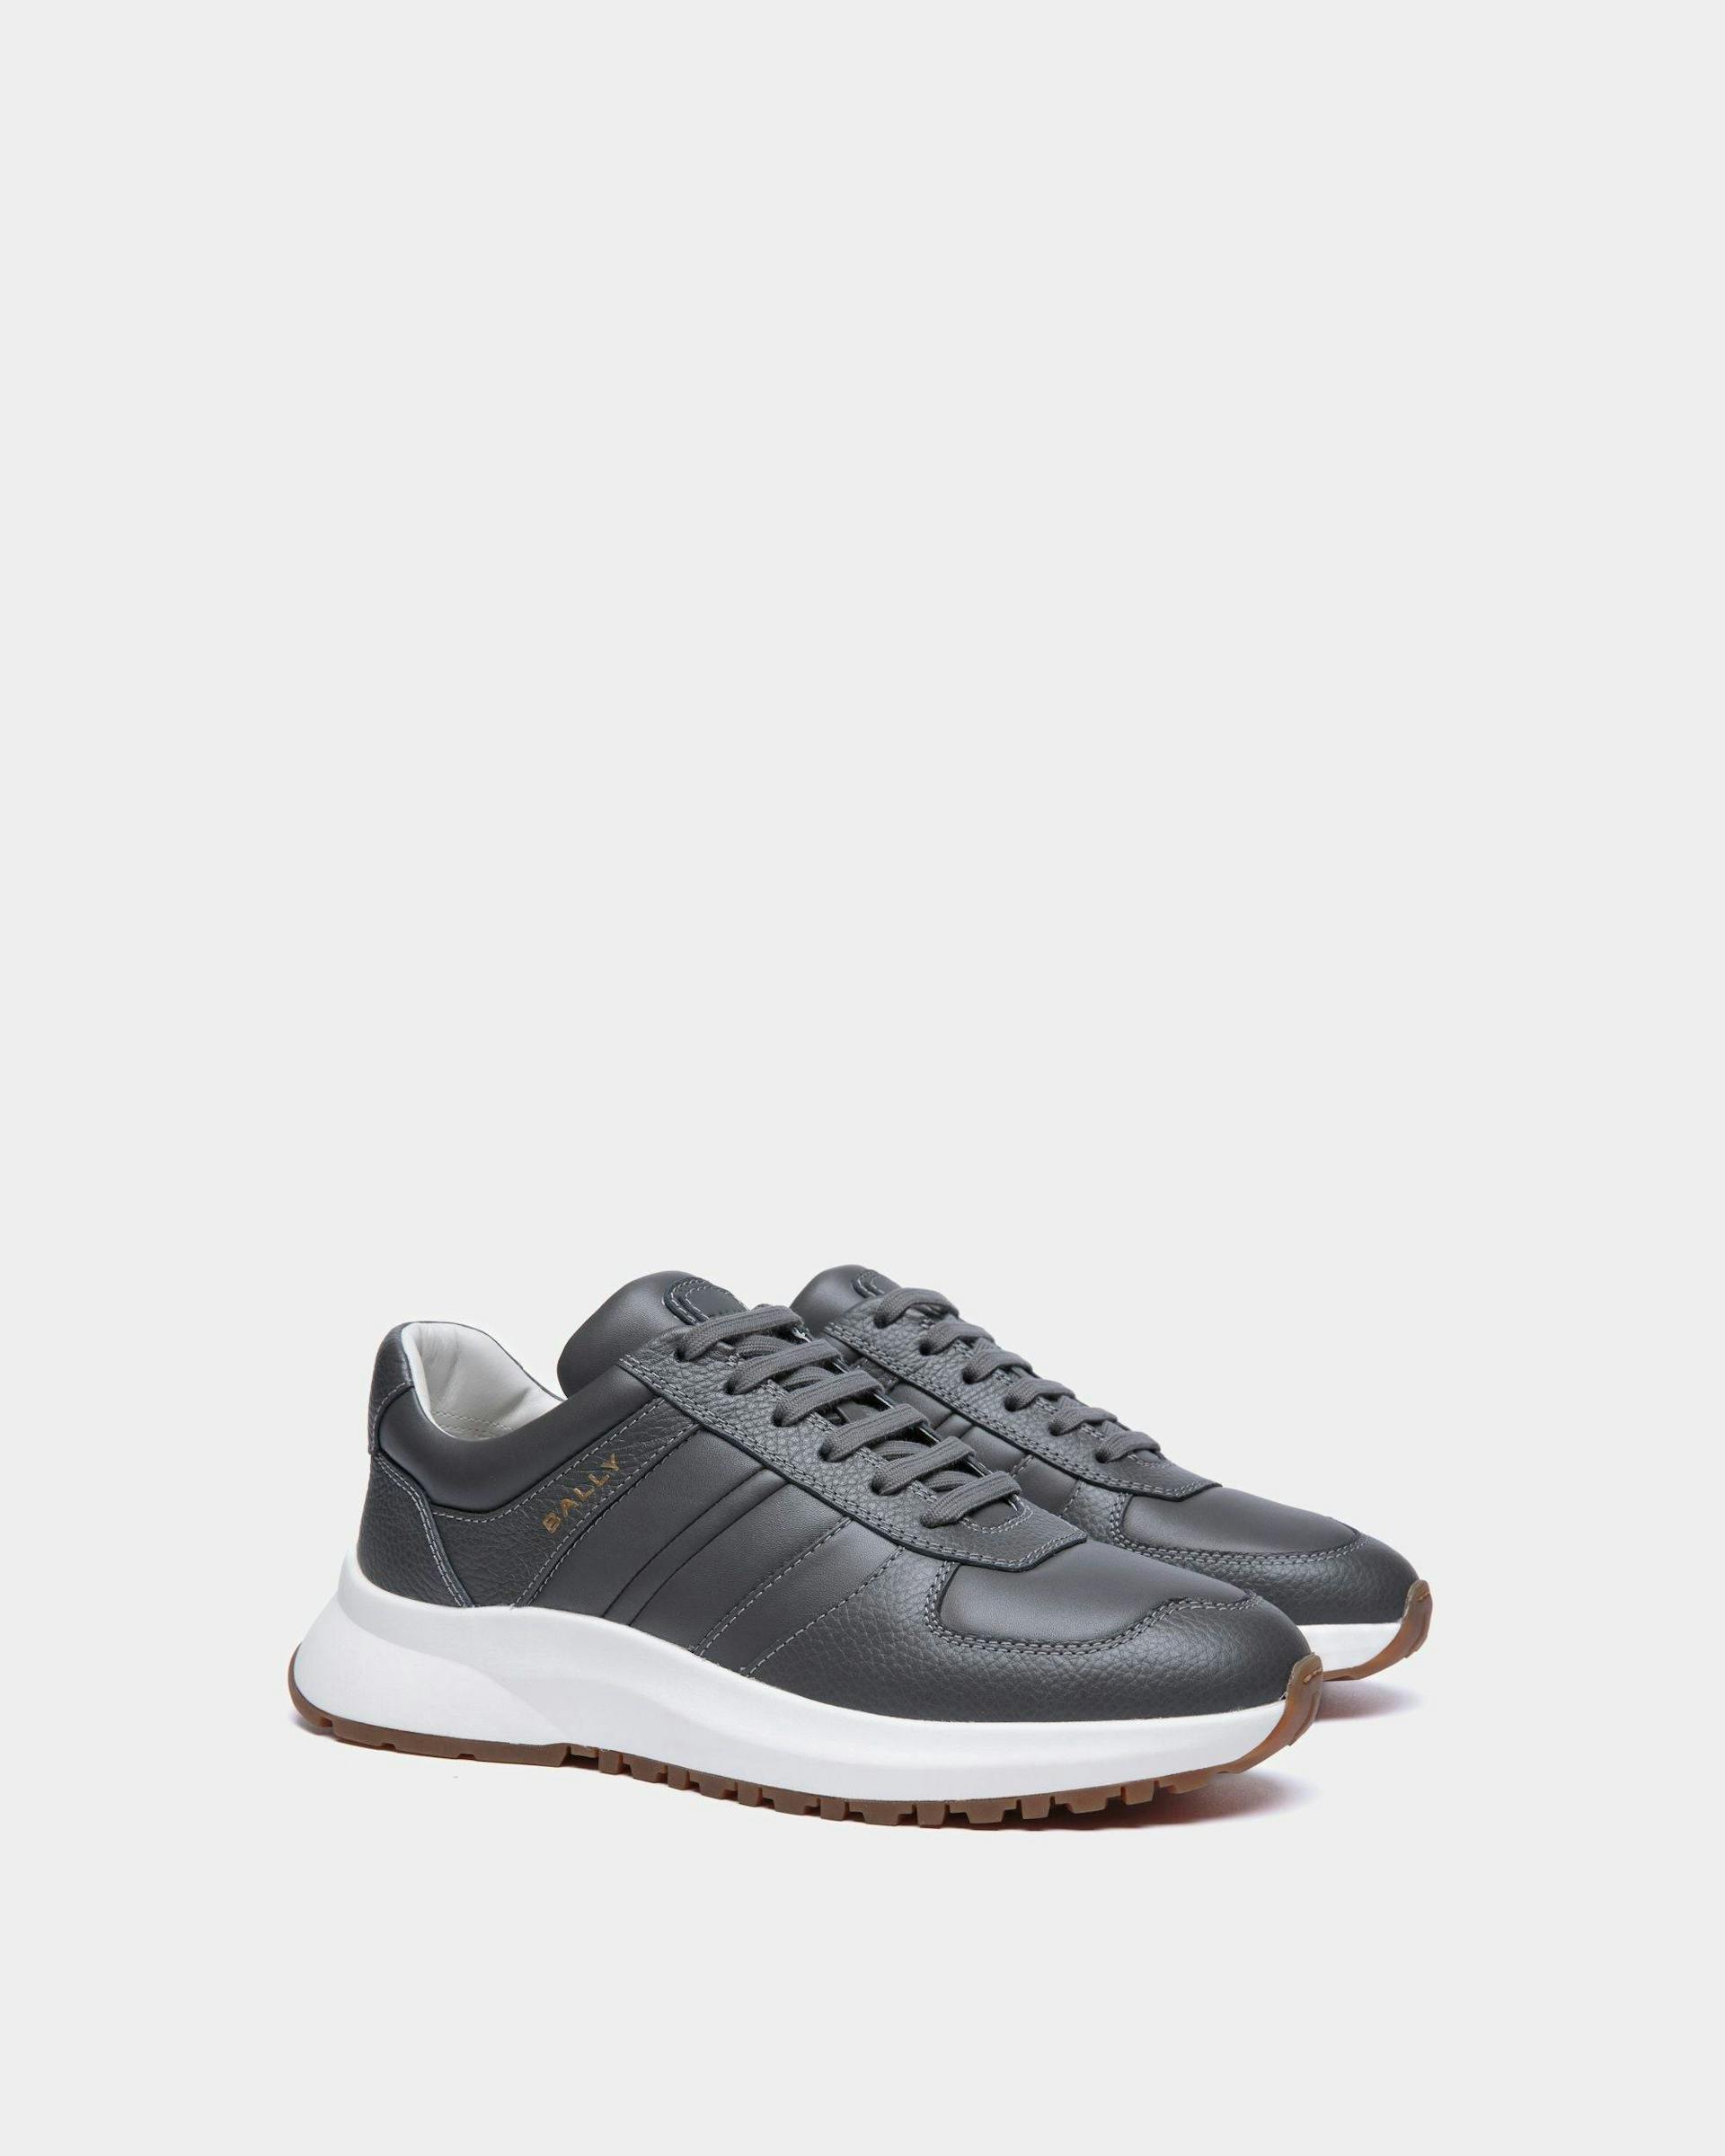 Men's Outline Sneaker In Grey Grained Leather | Bally | Still Life 3/4 Front